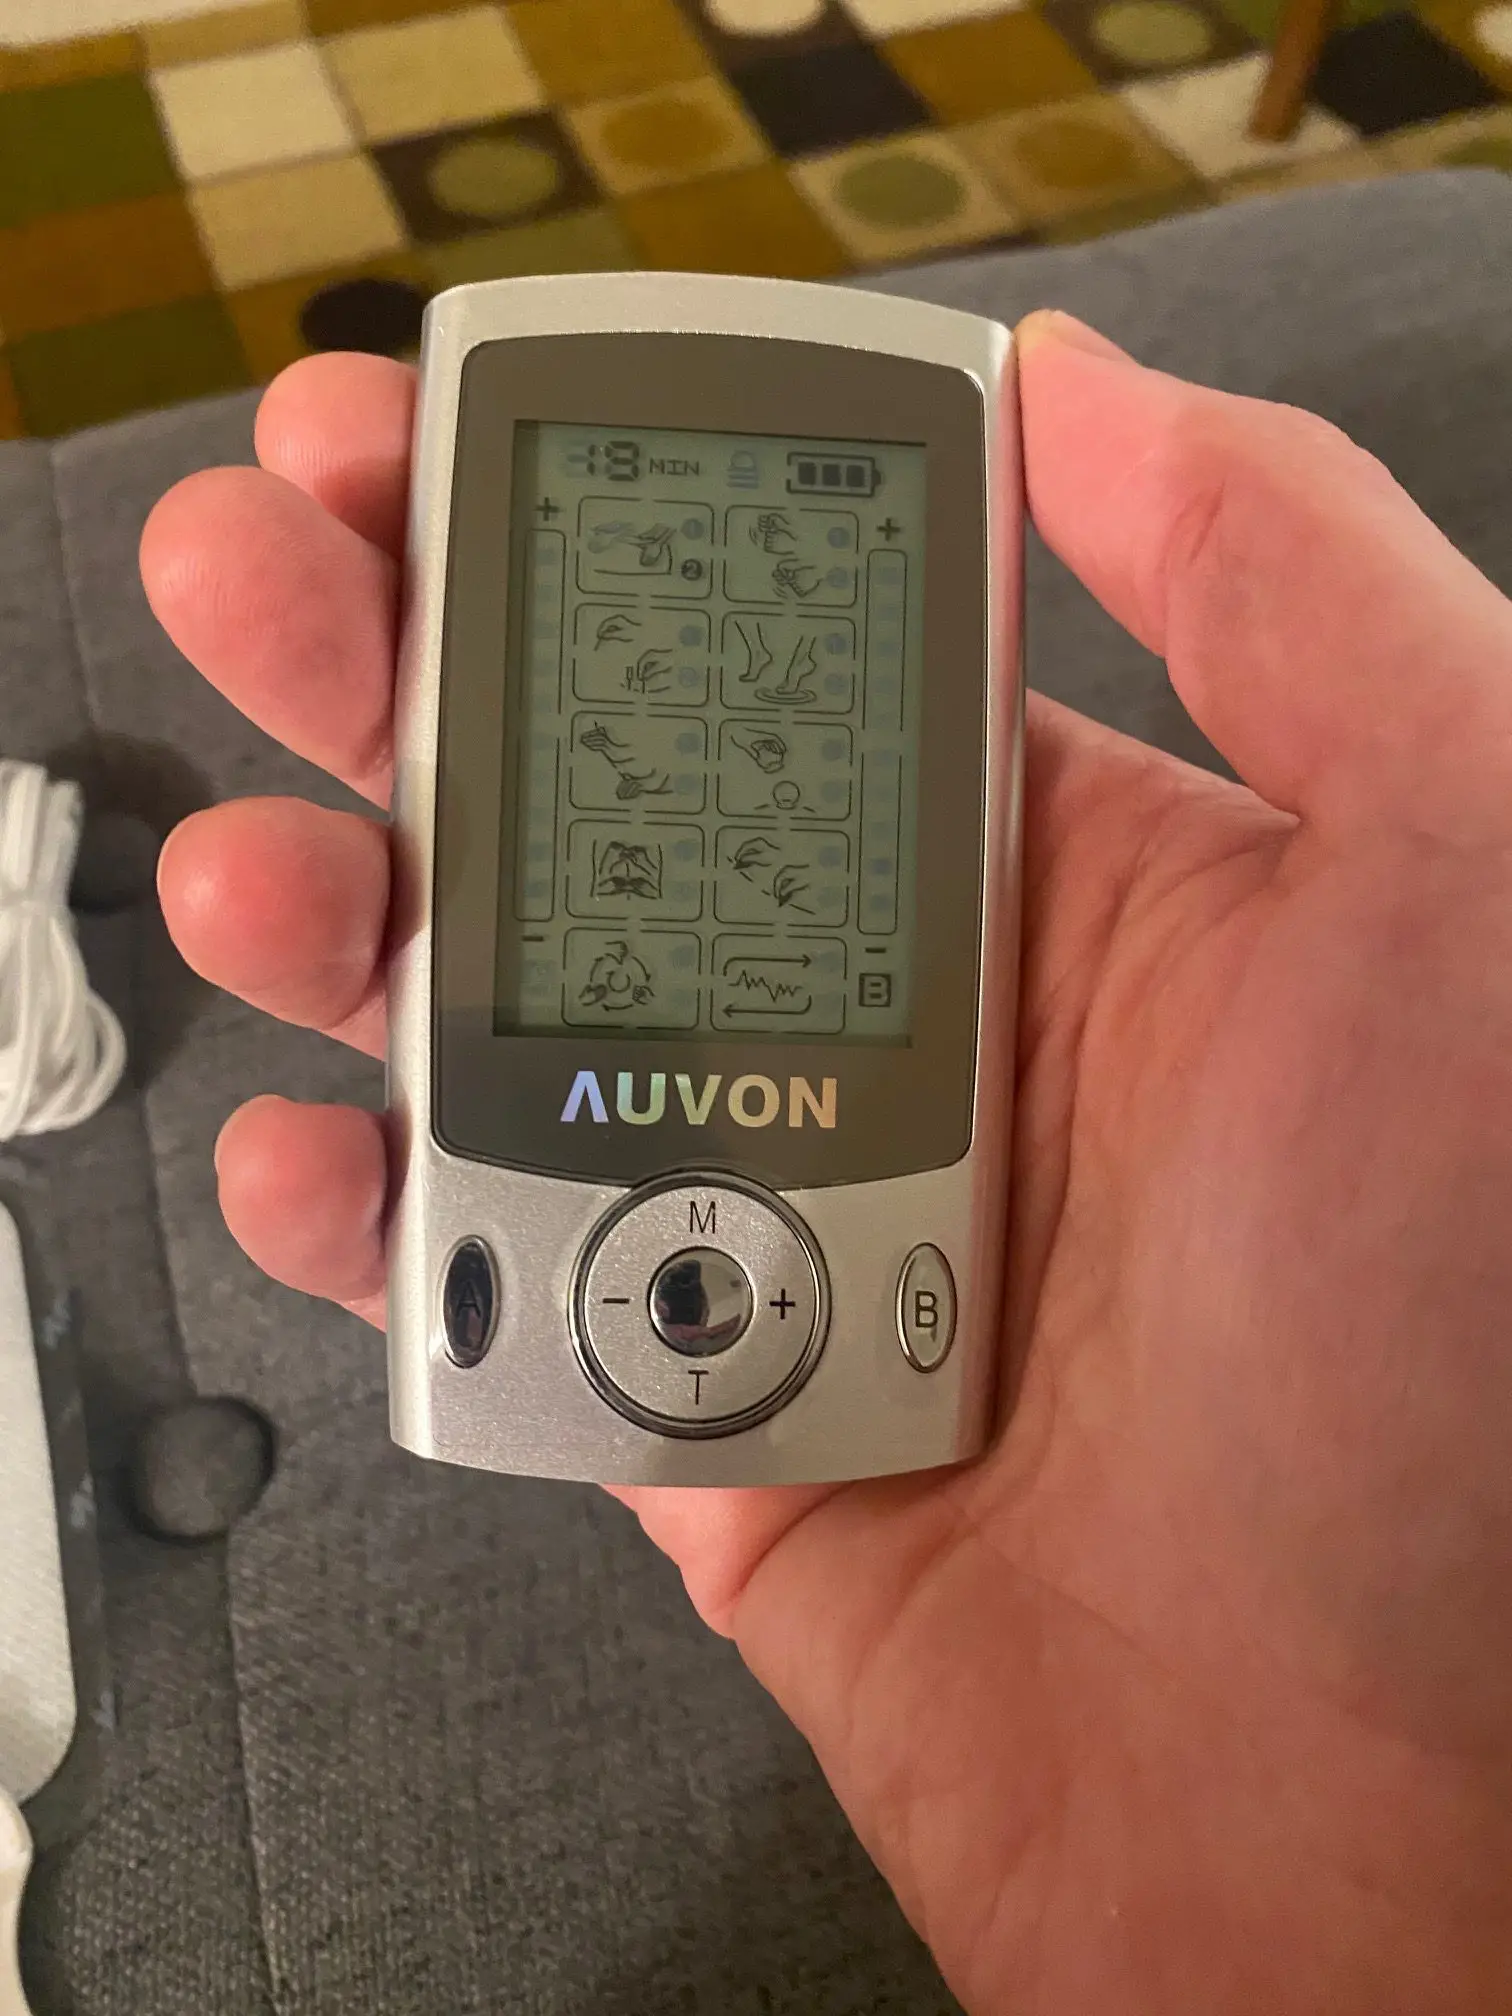 6 Tips to Fix a TENS Unit That’s Not Working Properly